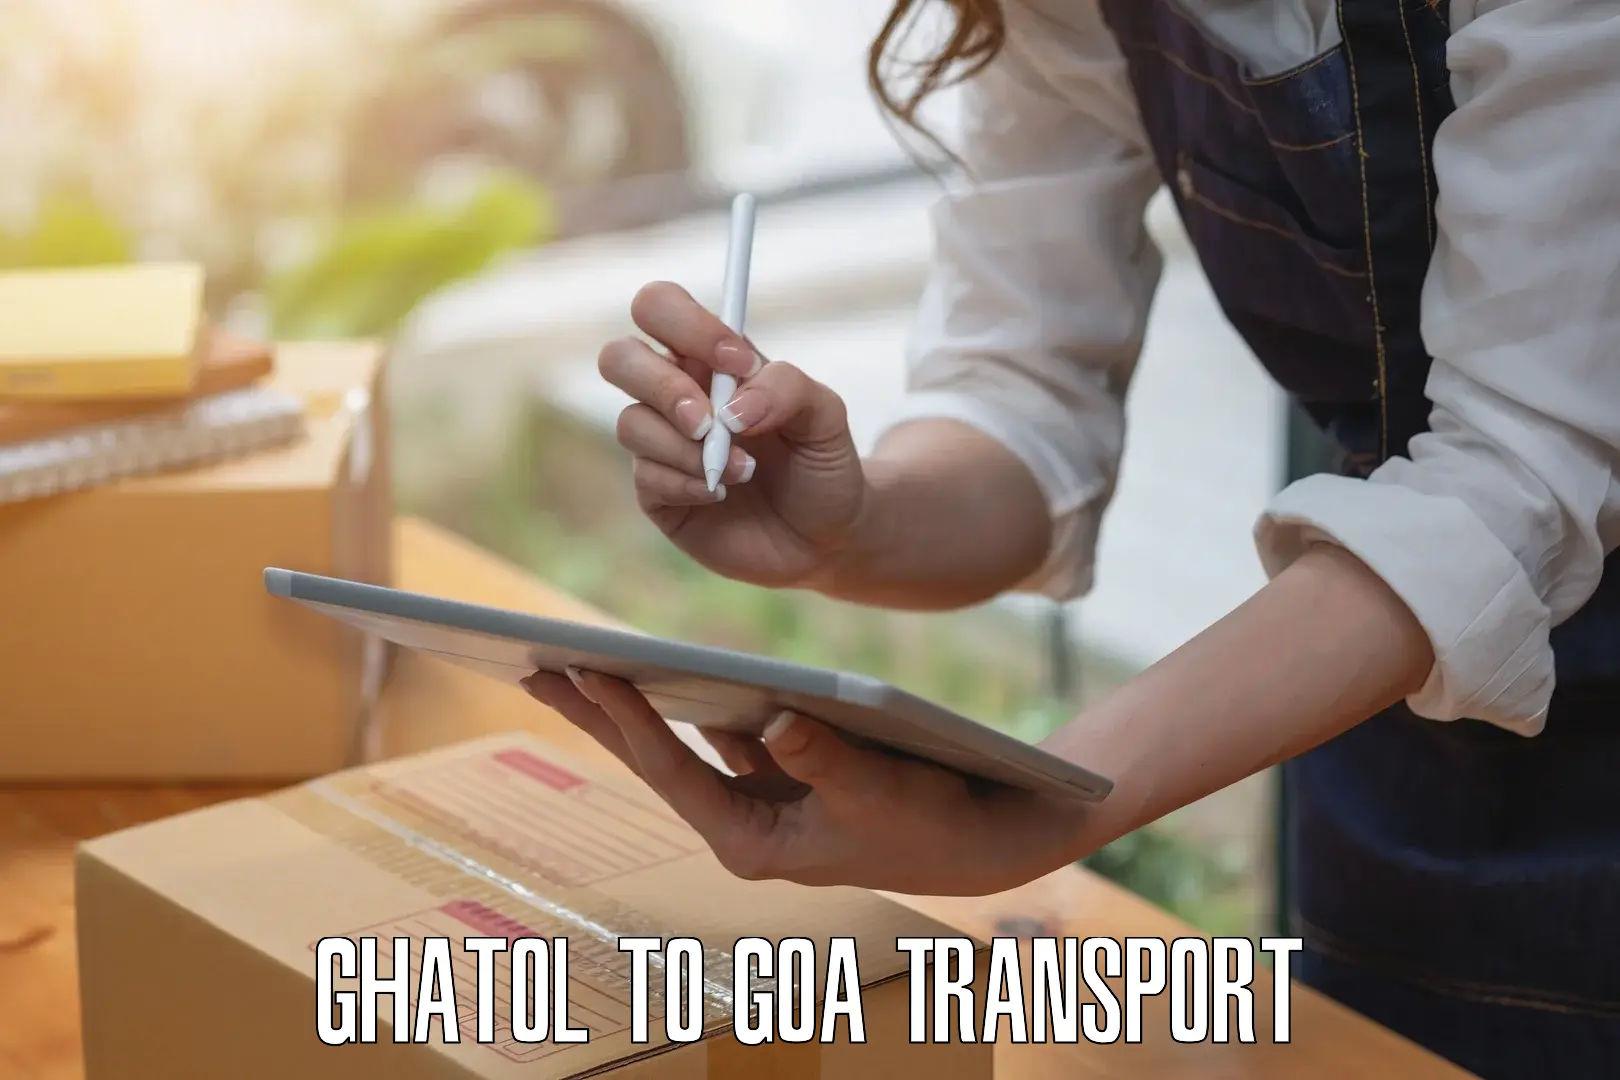 Vehicle courier services Ghatol to Panaji